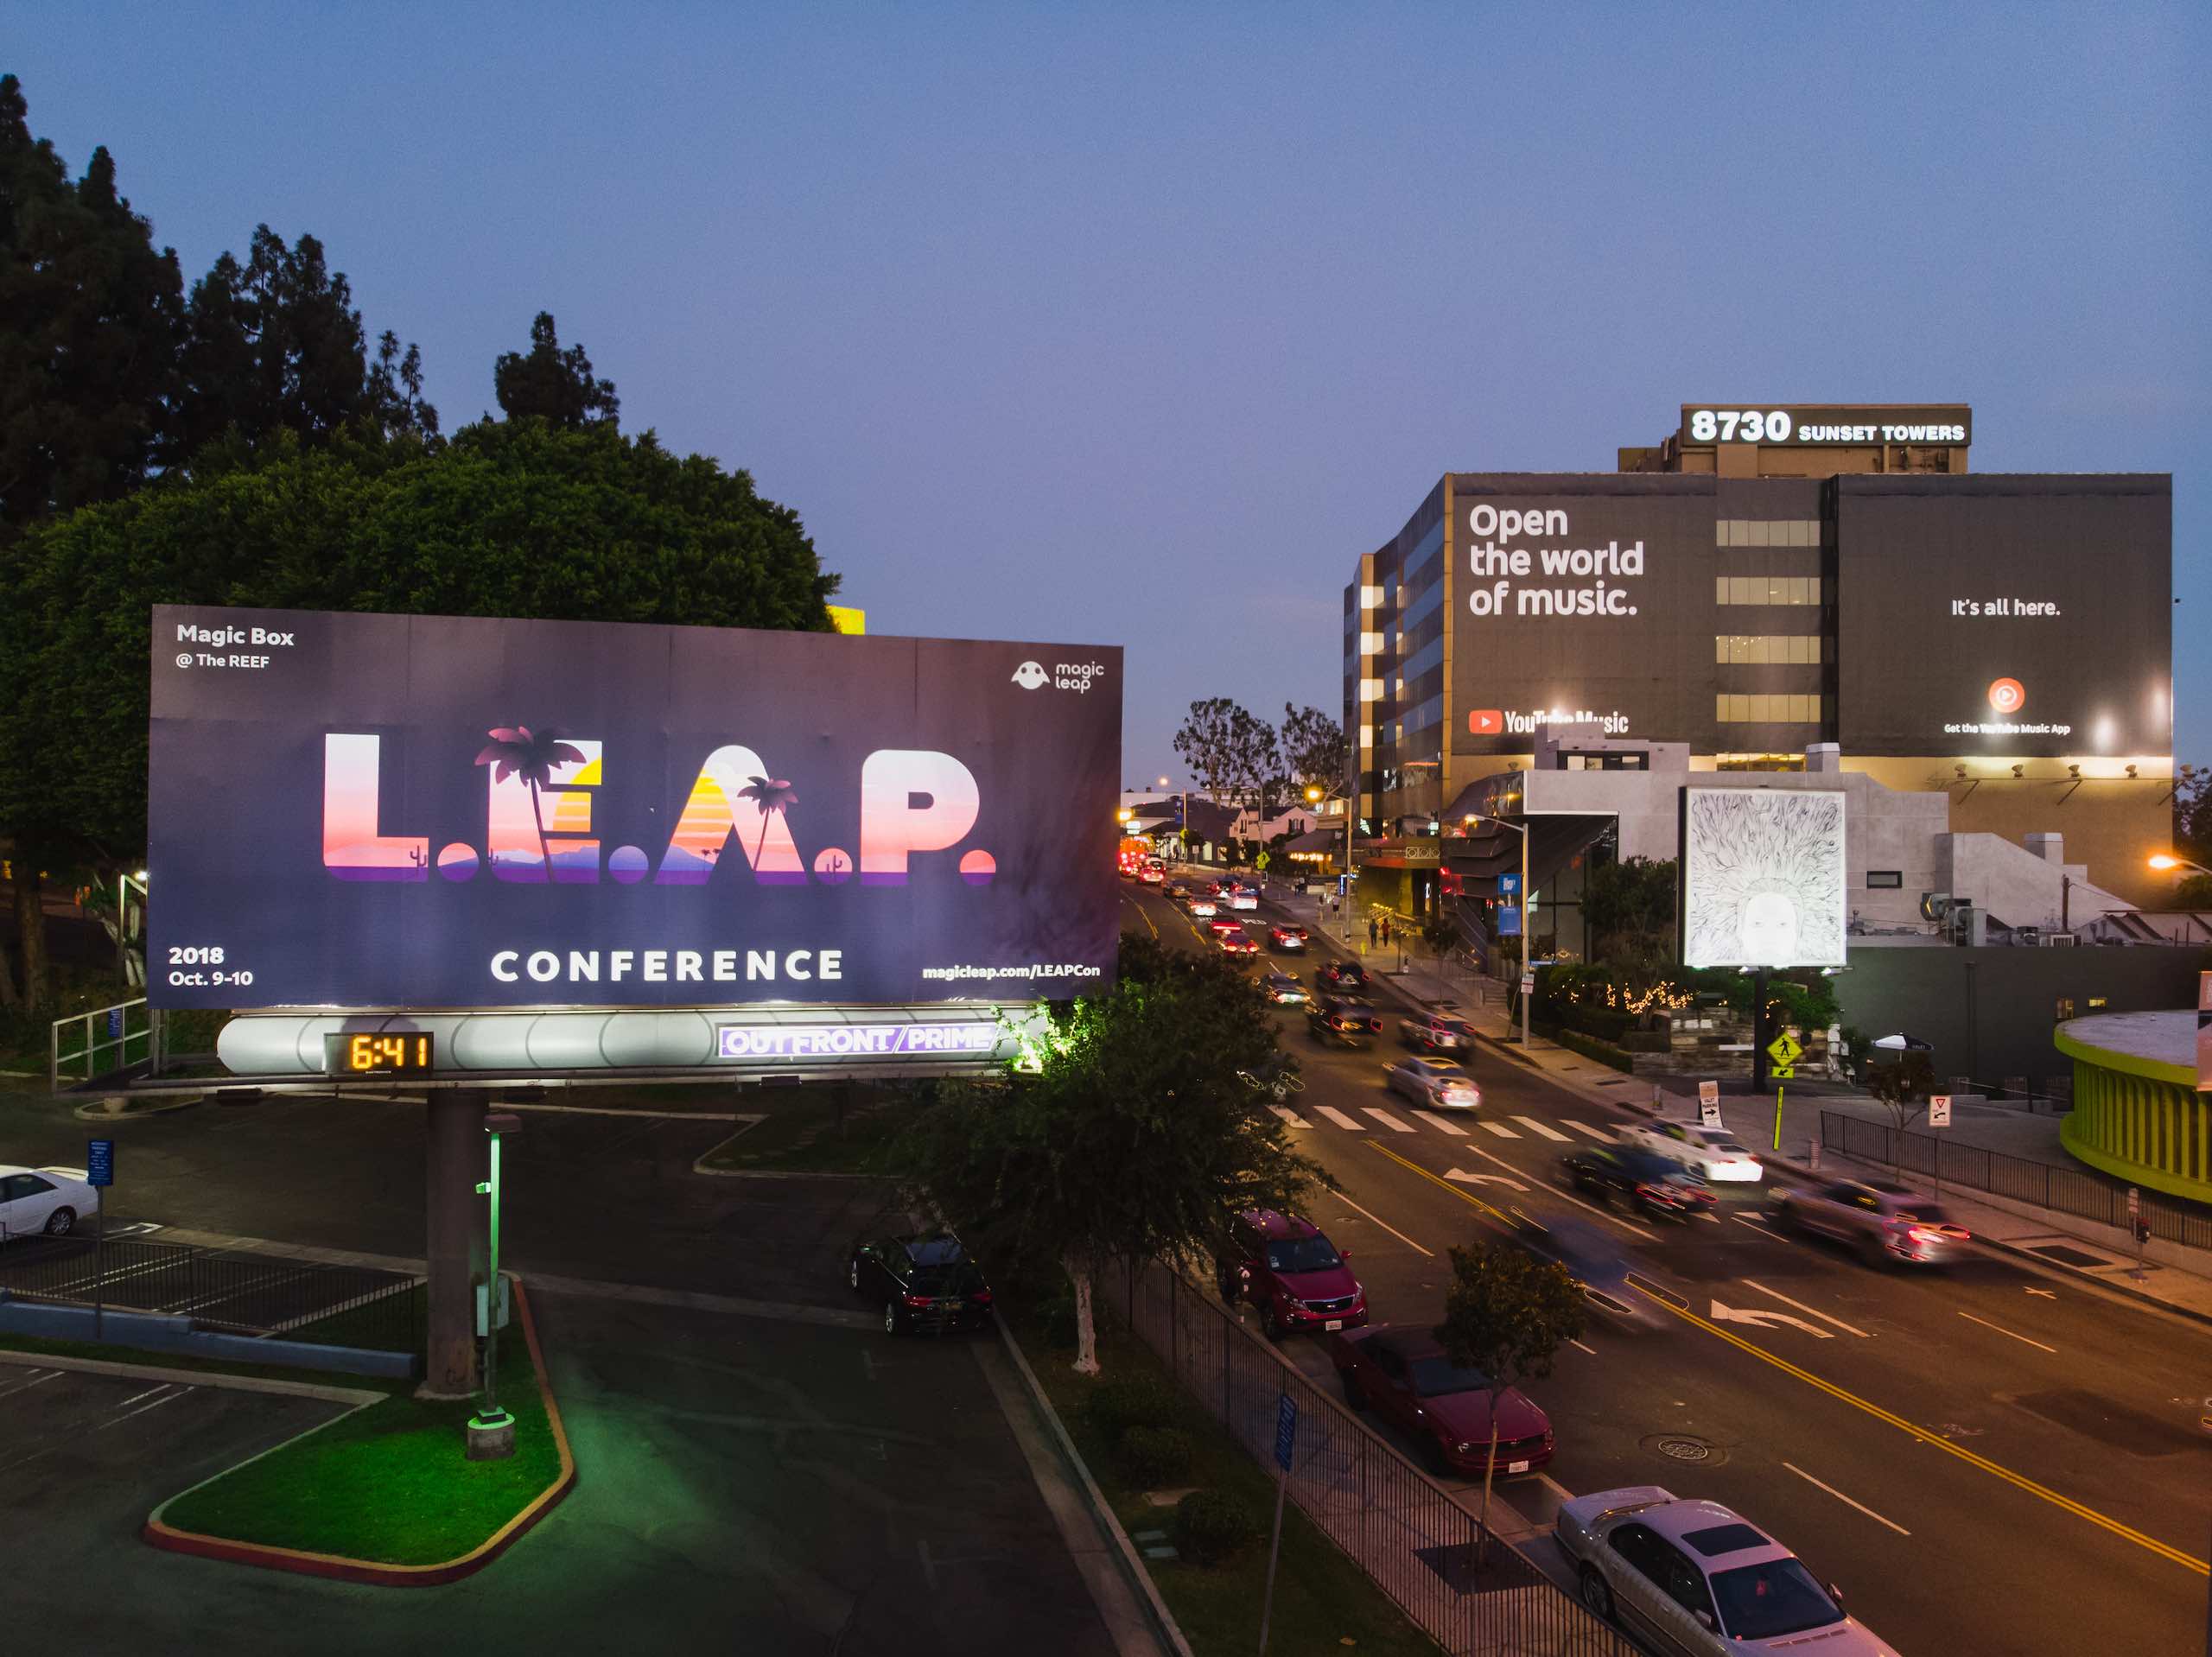 LEAP Conference billboard on display by a parking lot in city near road with cars parked and driving by at night